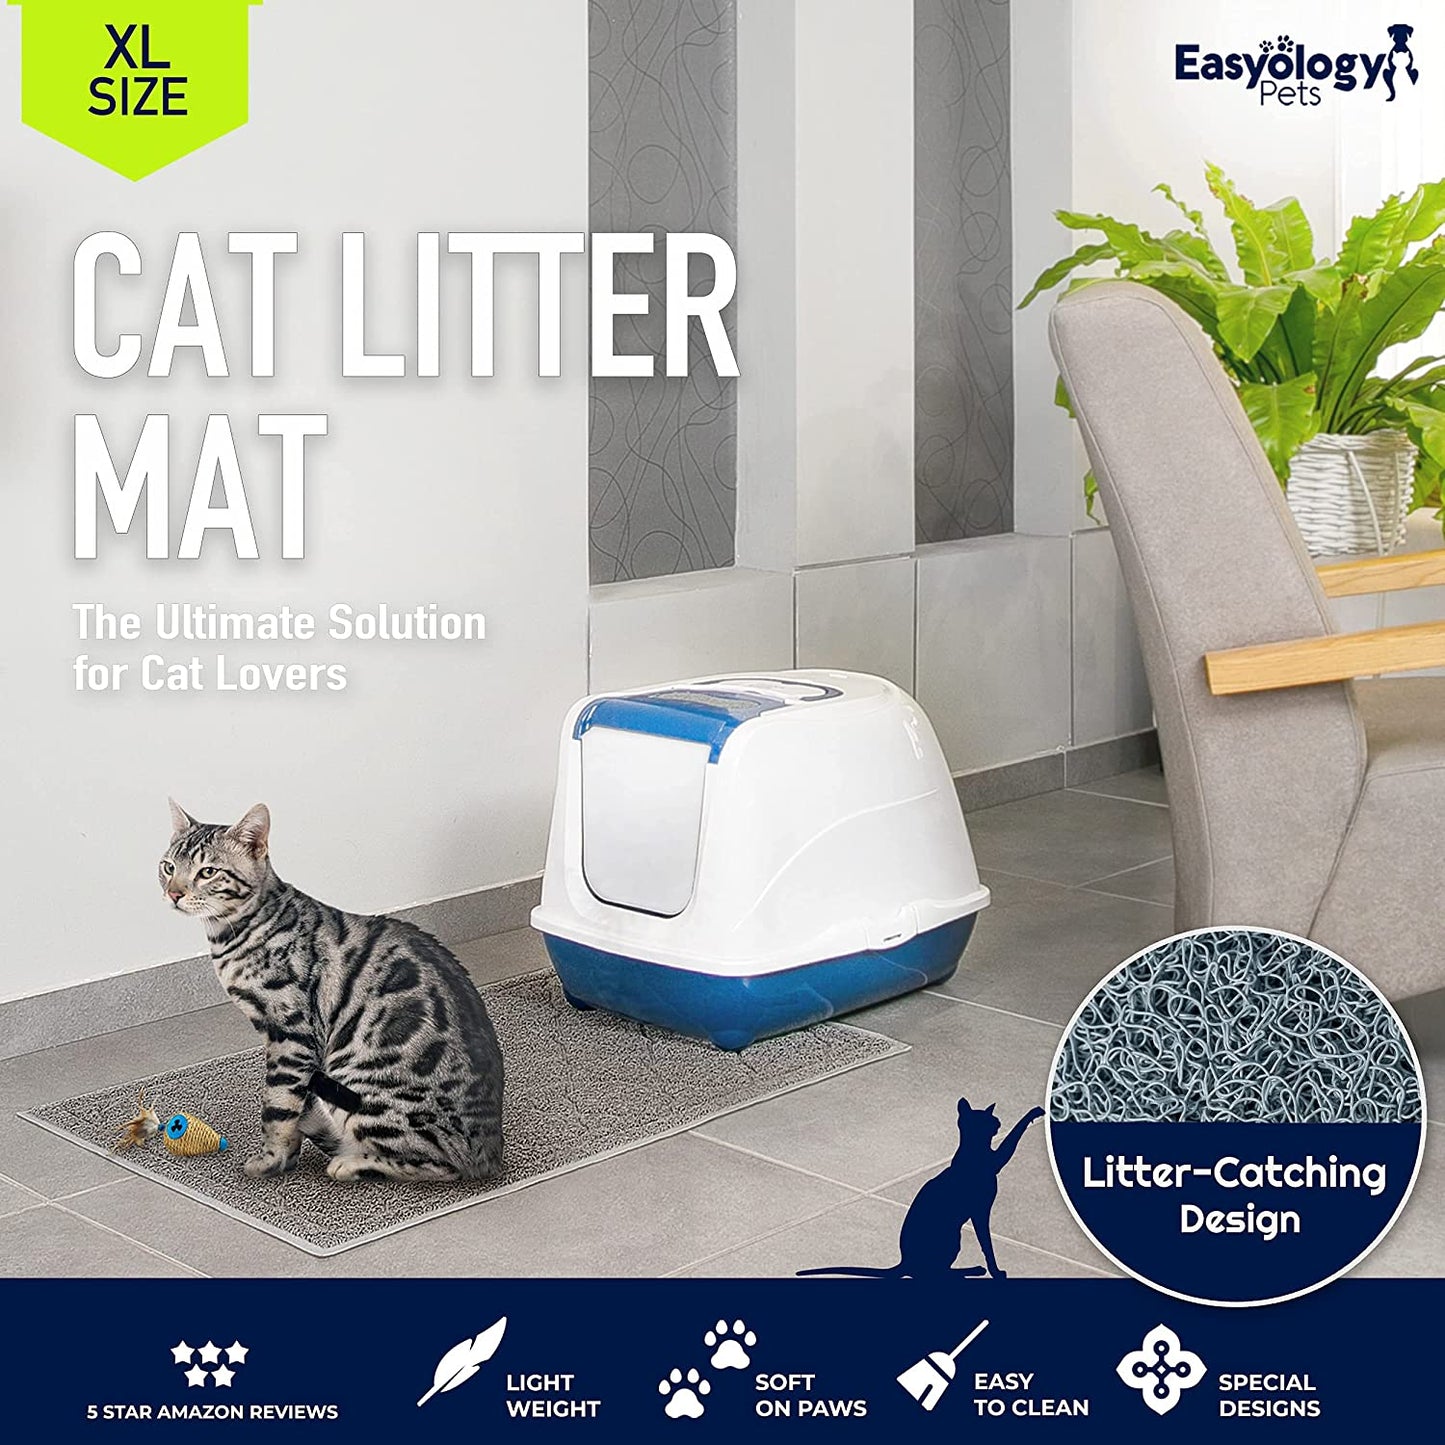 Premium Large Cat Litter Mat 35" x 23", Traps Messes, Easy Clean, Durable, Litter Box Mat with Scatter Control - Soft on Kitty Paws - (For 1 piece(s))